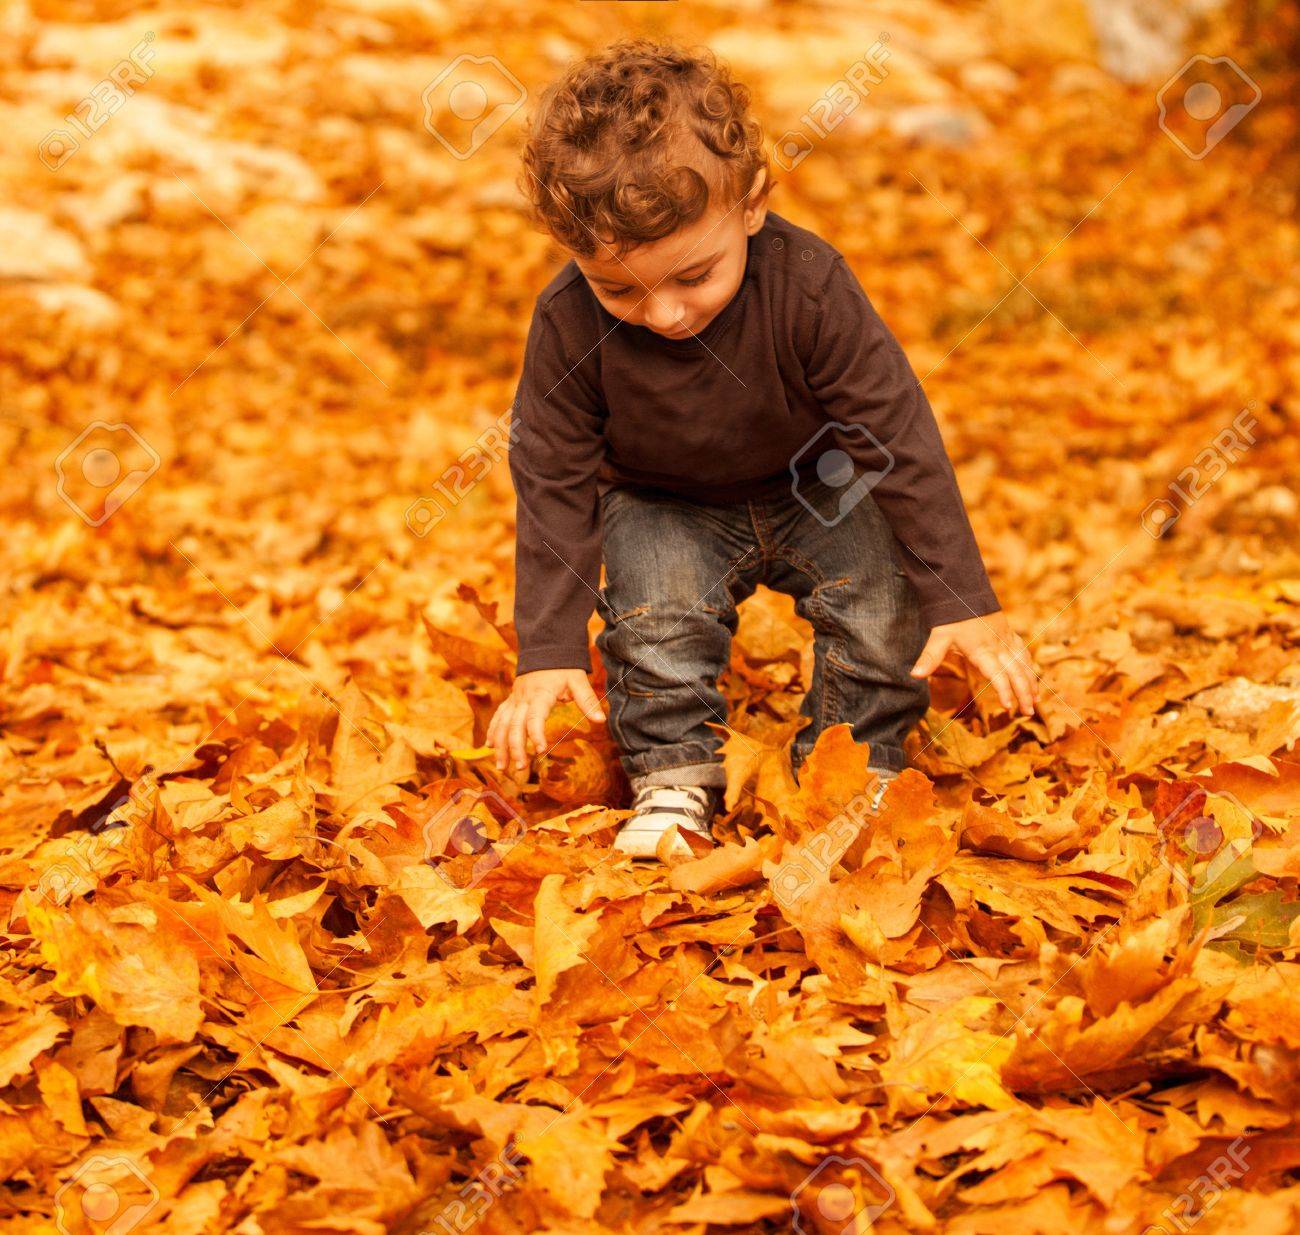 Image result for In autumn, they played games in the dry leaves.